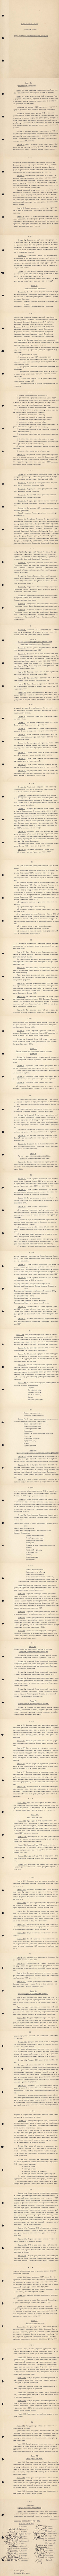 The Constitution of the USSR of 1936 (Stalinist). - History of the USSR, Constitution, Stalin, Socialism, Longpost